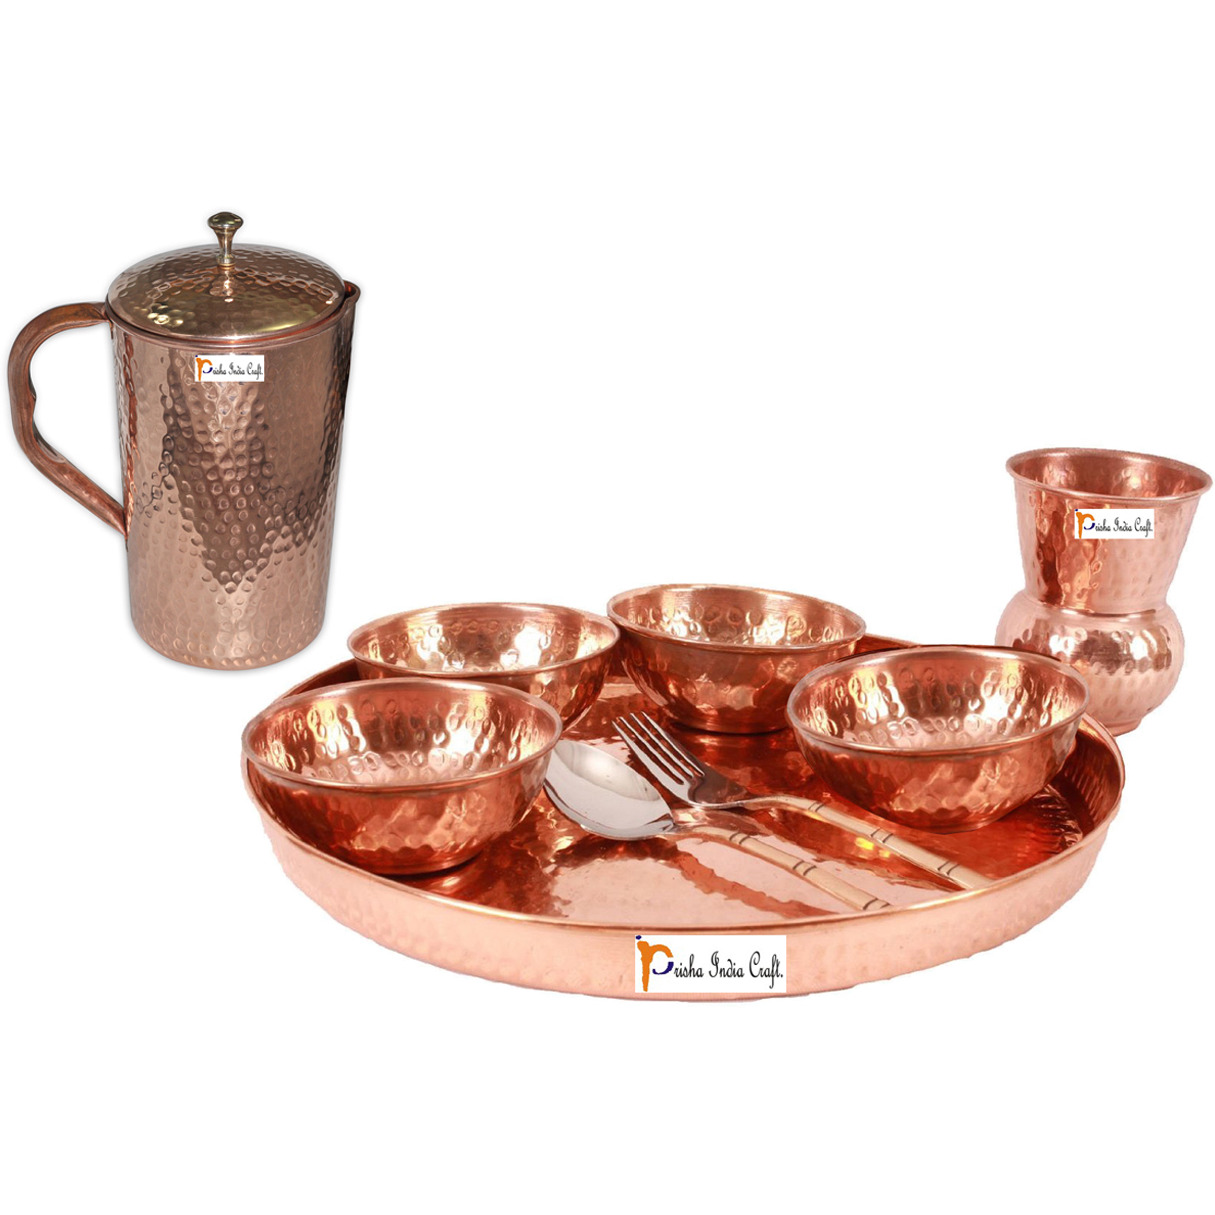 Prisha India Craft B. Dinnerware Traditional 100% Pure Copper Dinner Set of Thali Plate, Bowls, Glass and Spoon, Dia 12  With 1 Pure Copper Hammered Pitcher Jug - Christmas Gift